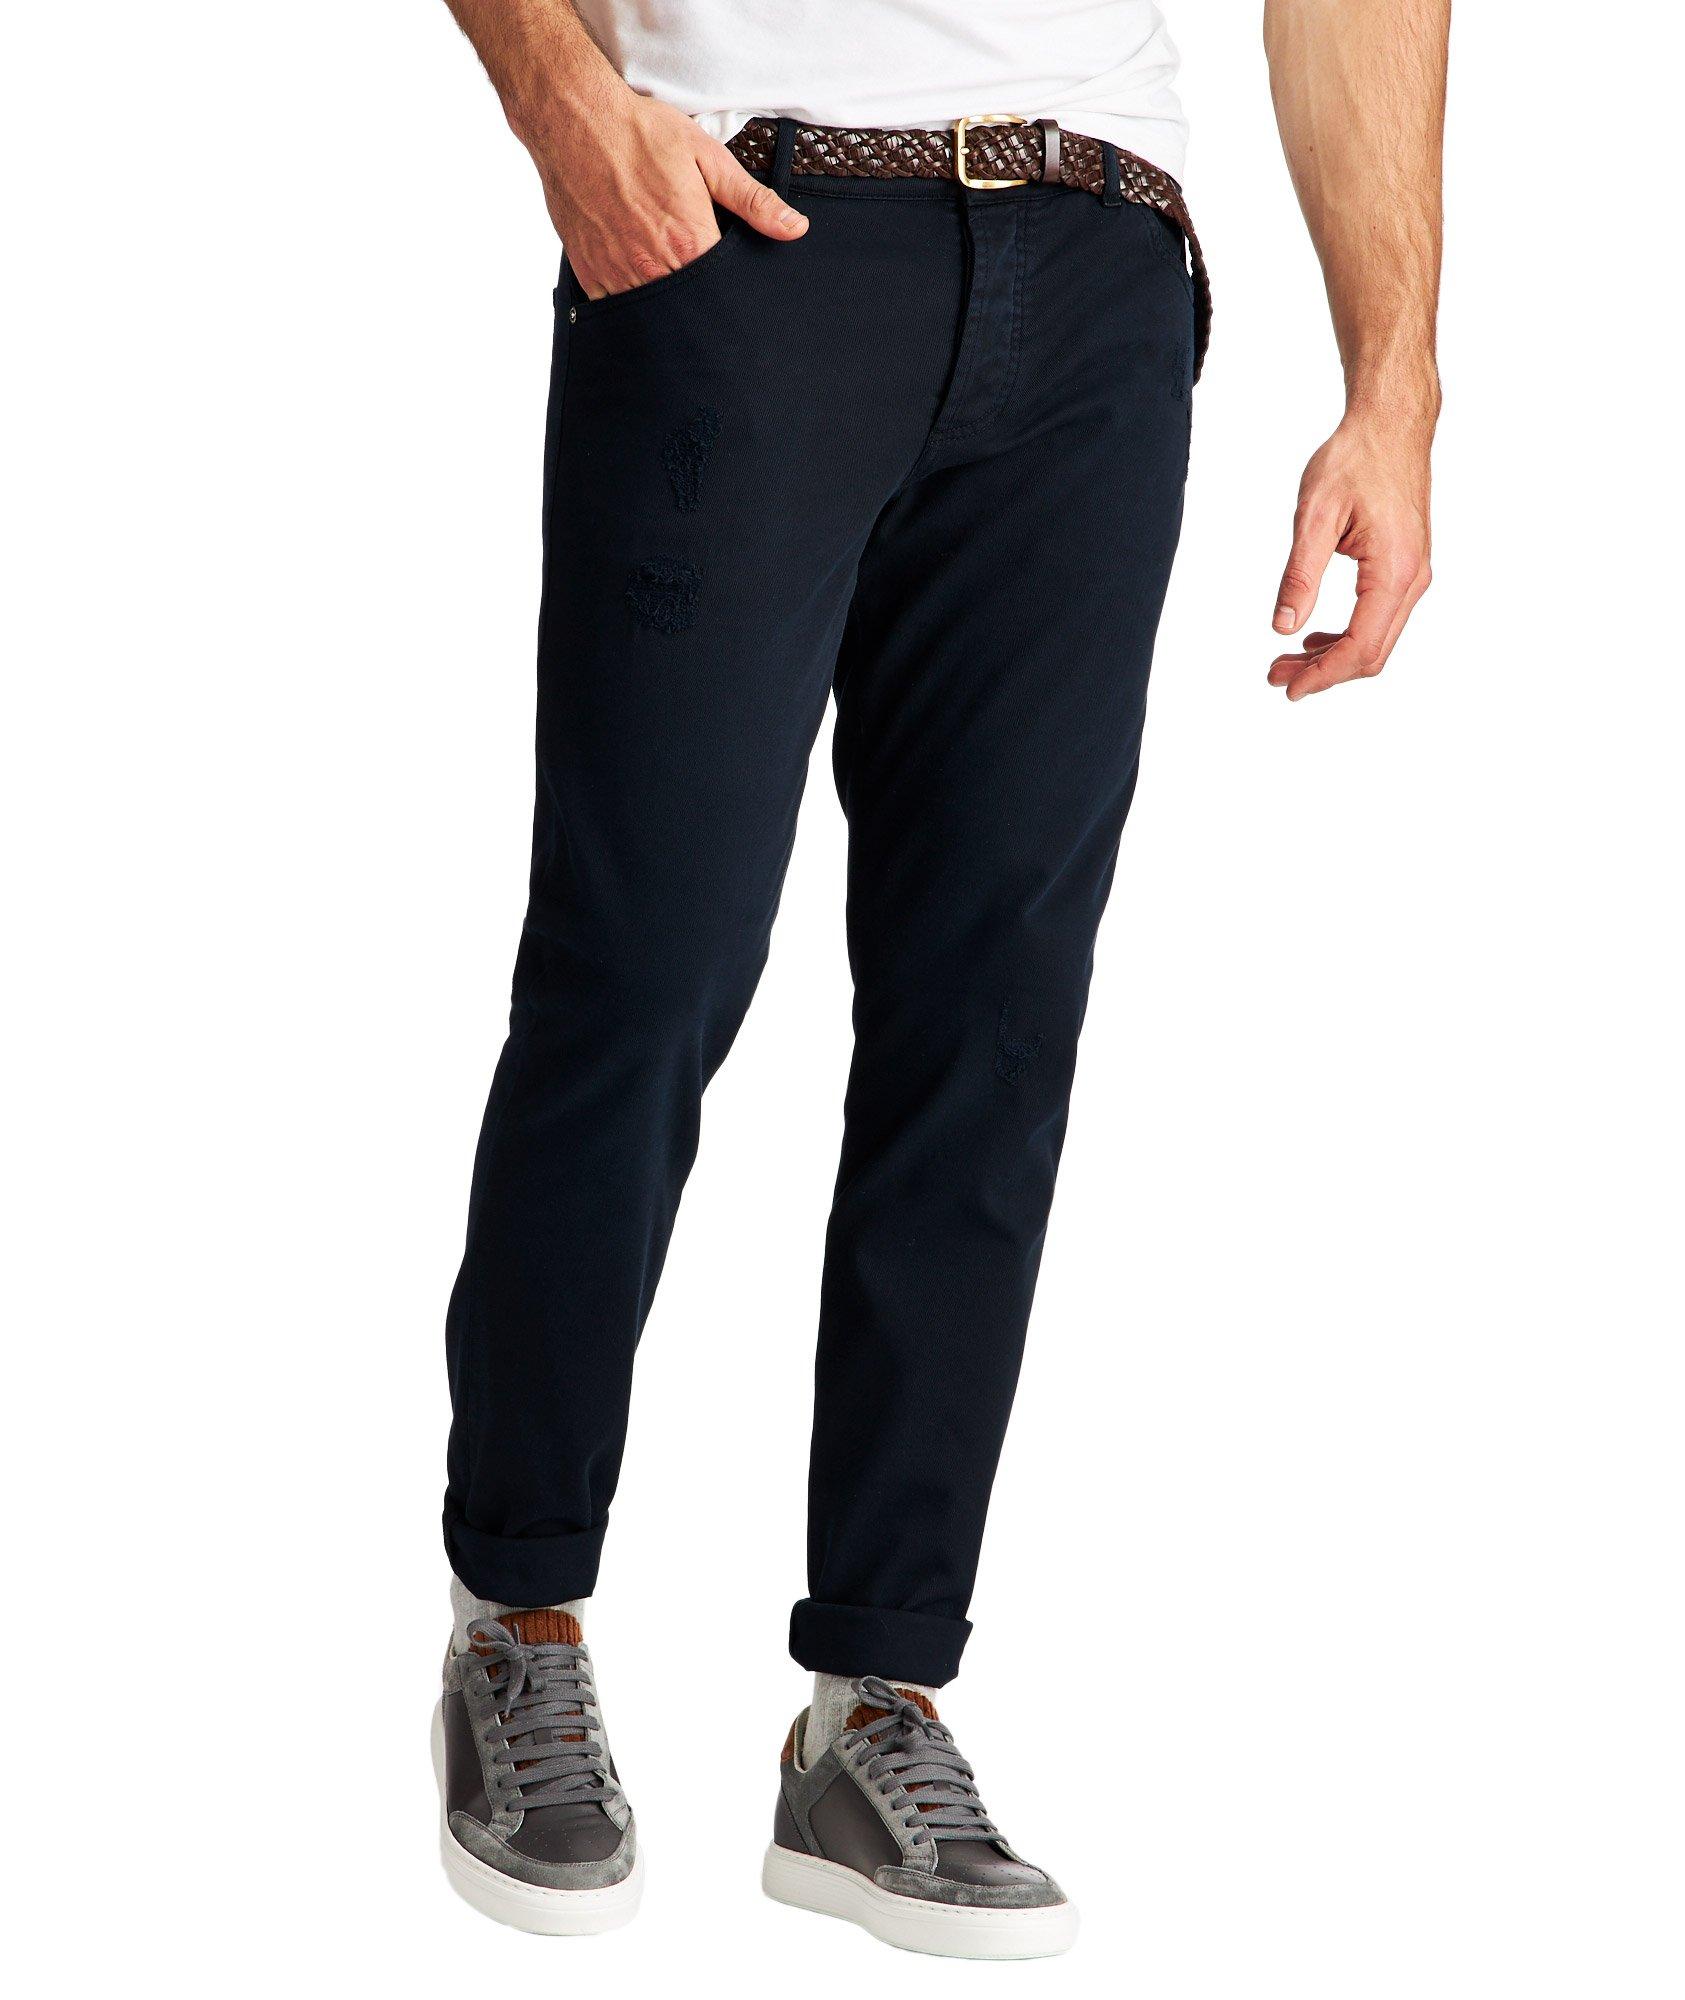 Skinny Fit Jeans image 0